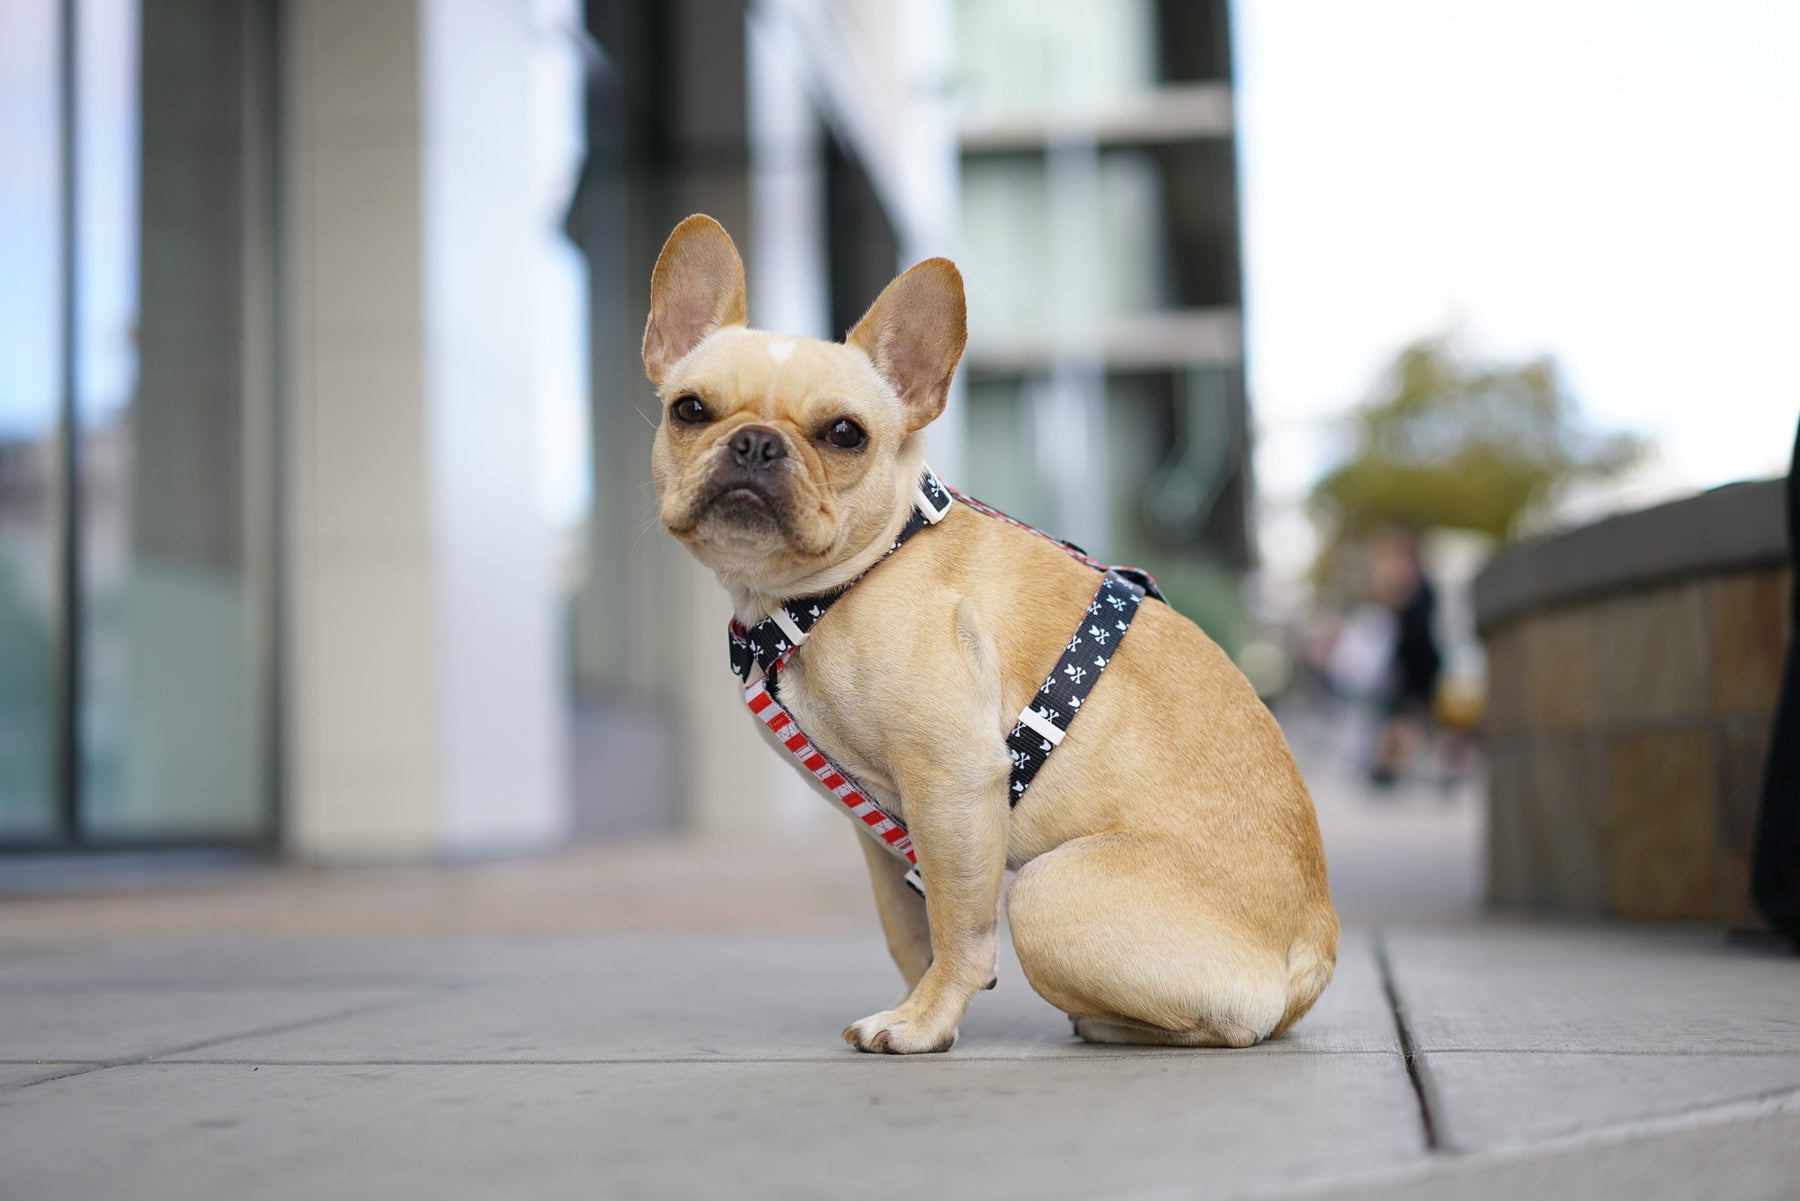 Frenchie Strap Harness - Bad to The Bone | Frenchie Bulldog | French Bulldog Accessories & Apparel